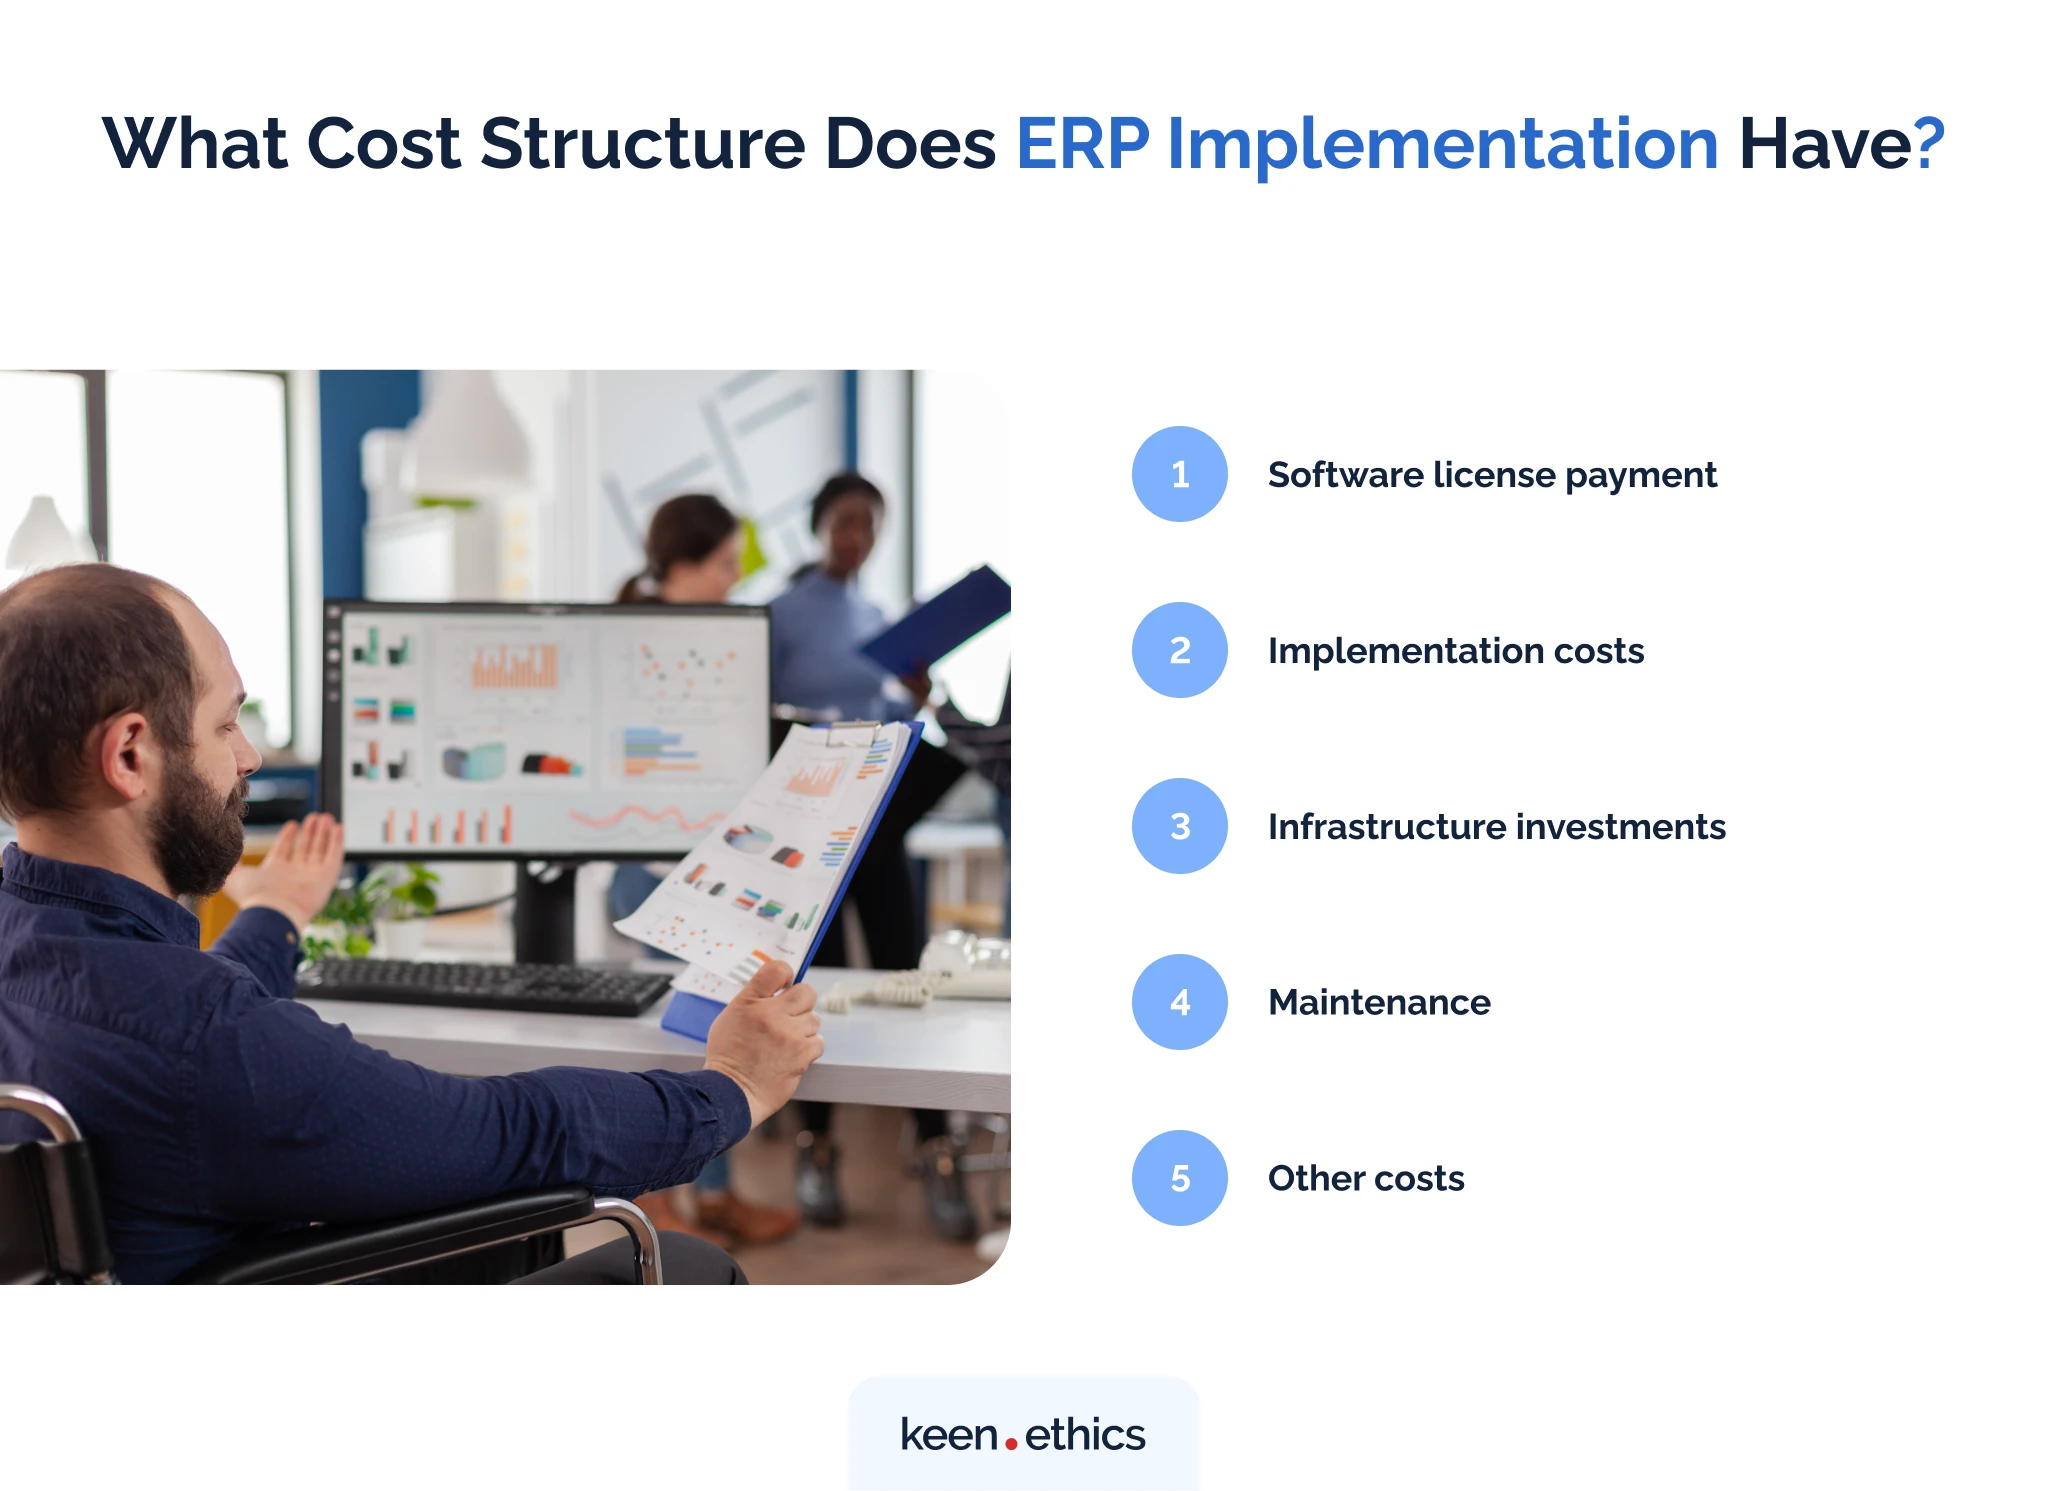 What Cost Structure Does ERP Implementation Have?